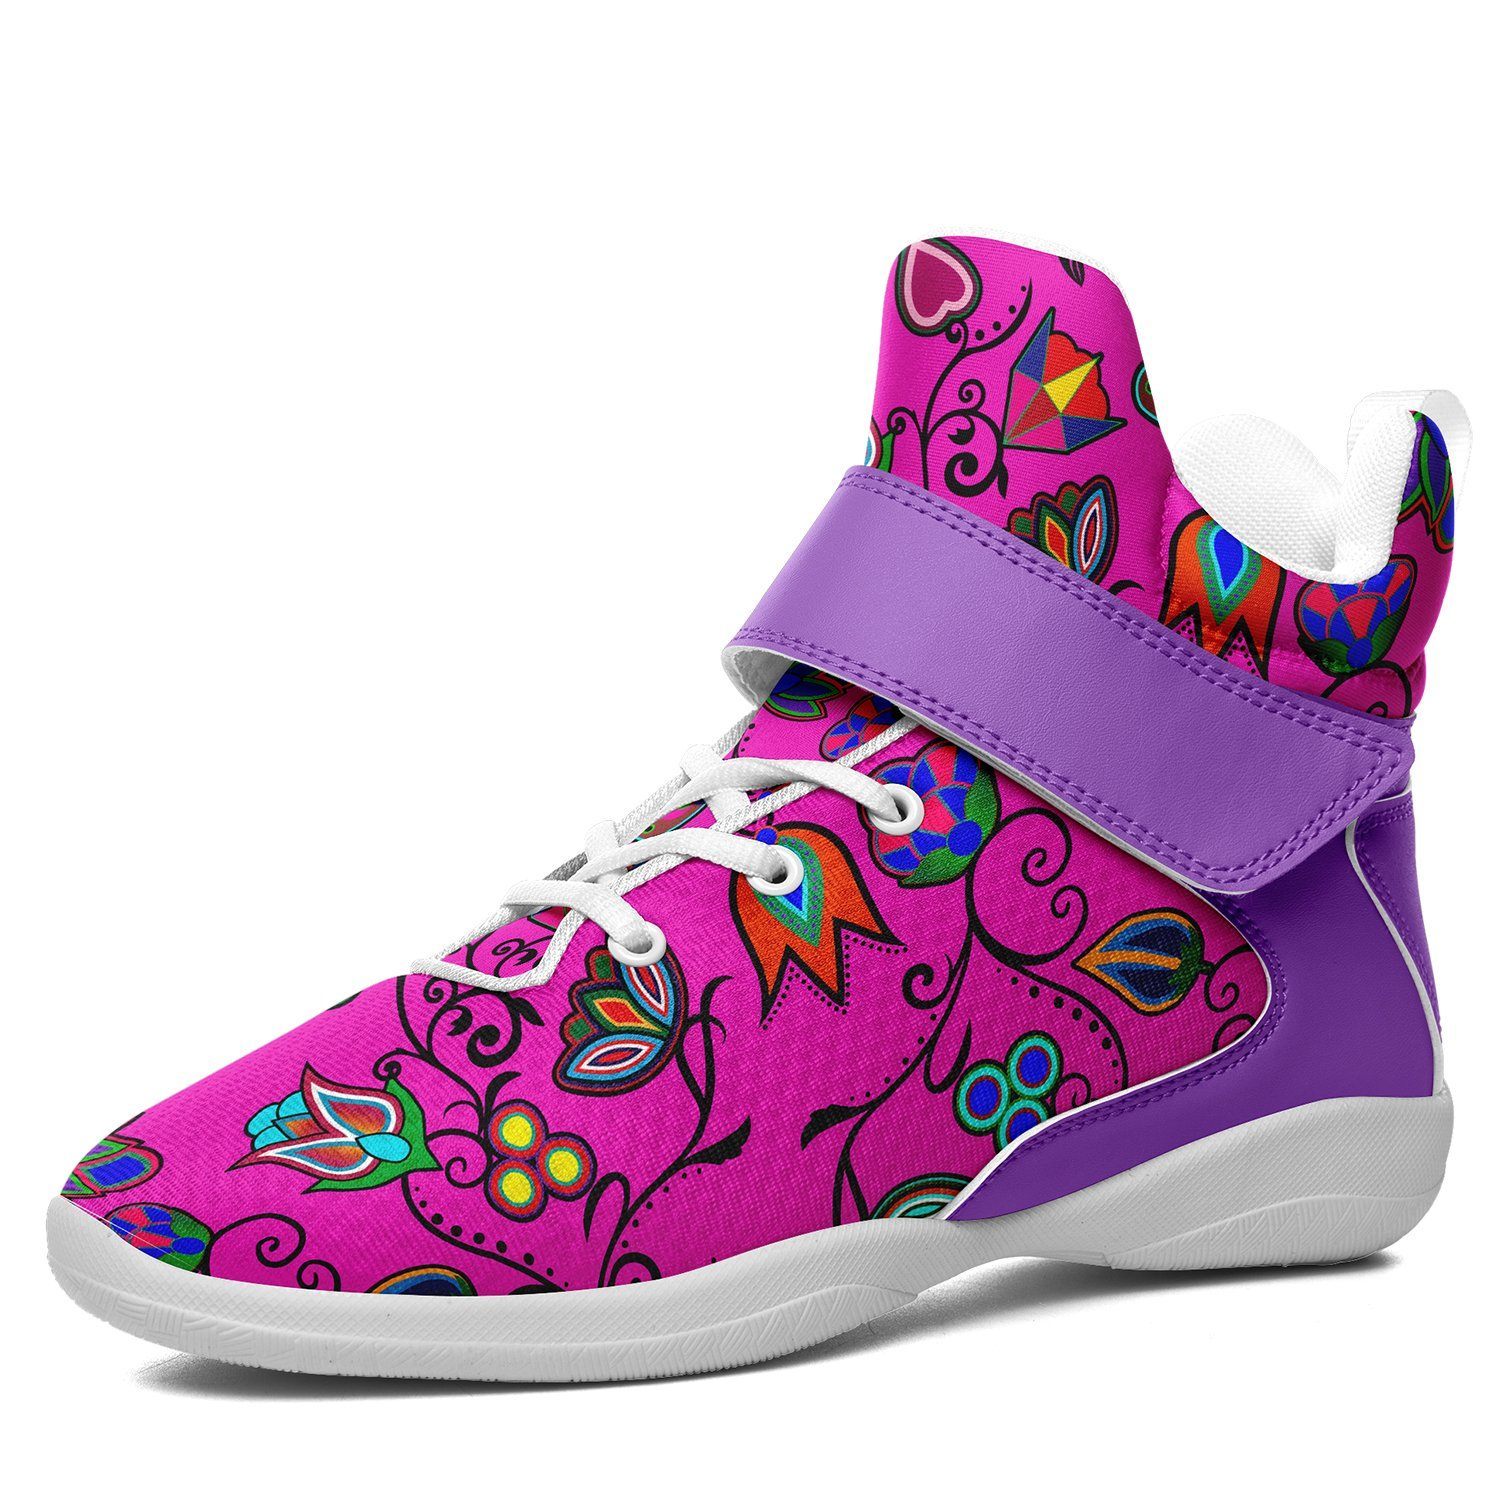 Indigenous Paisley Ipottaa Basketball / Sport High Top Shoes - White Sole 49 Dzine US Men 7 / EUR 40 White Sole with Lavender Strap 